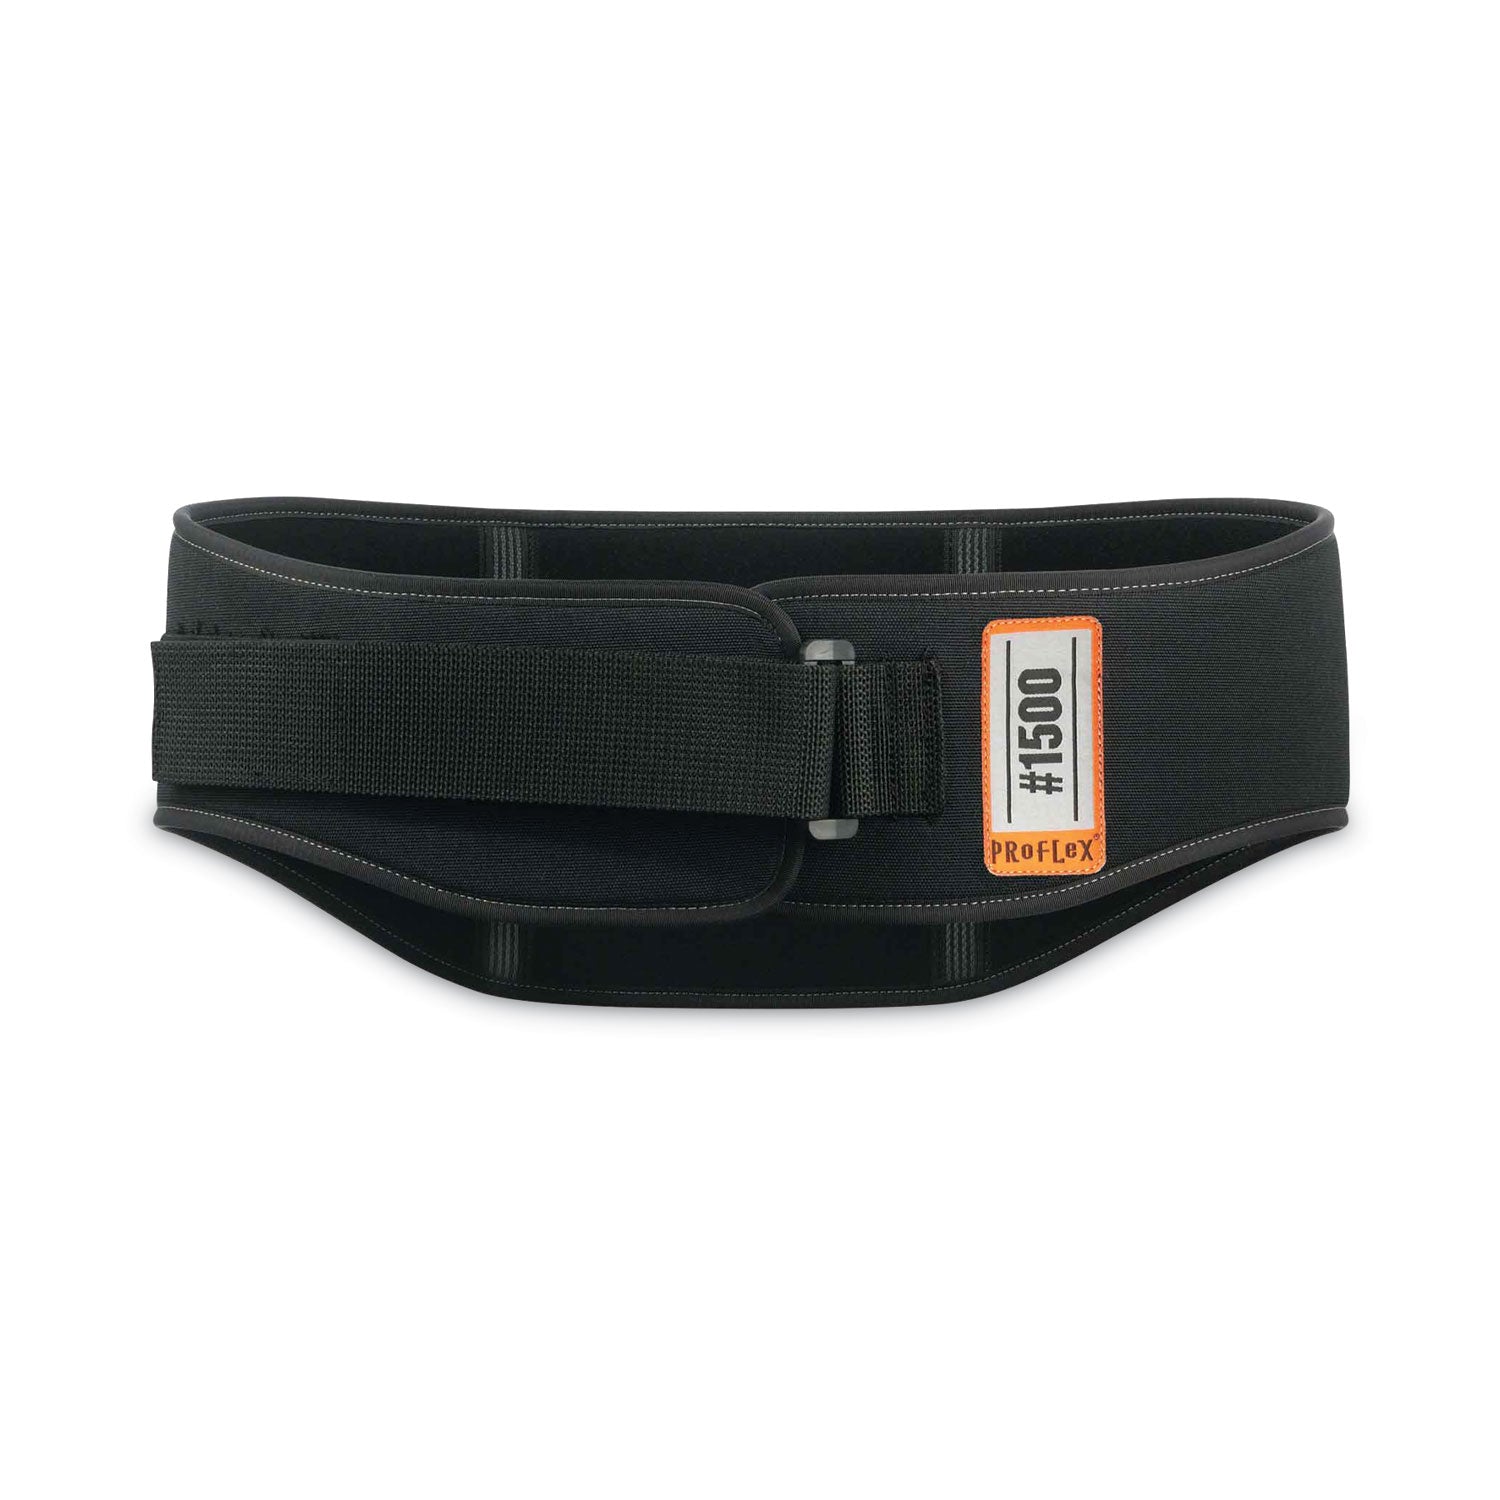 proflex-1500-weight-lifters-style-back-support-belt-2x-large-42-to-46-waist-black-ships-in-1-3-business-days_ego11475 - 1